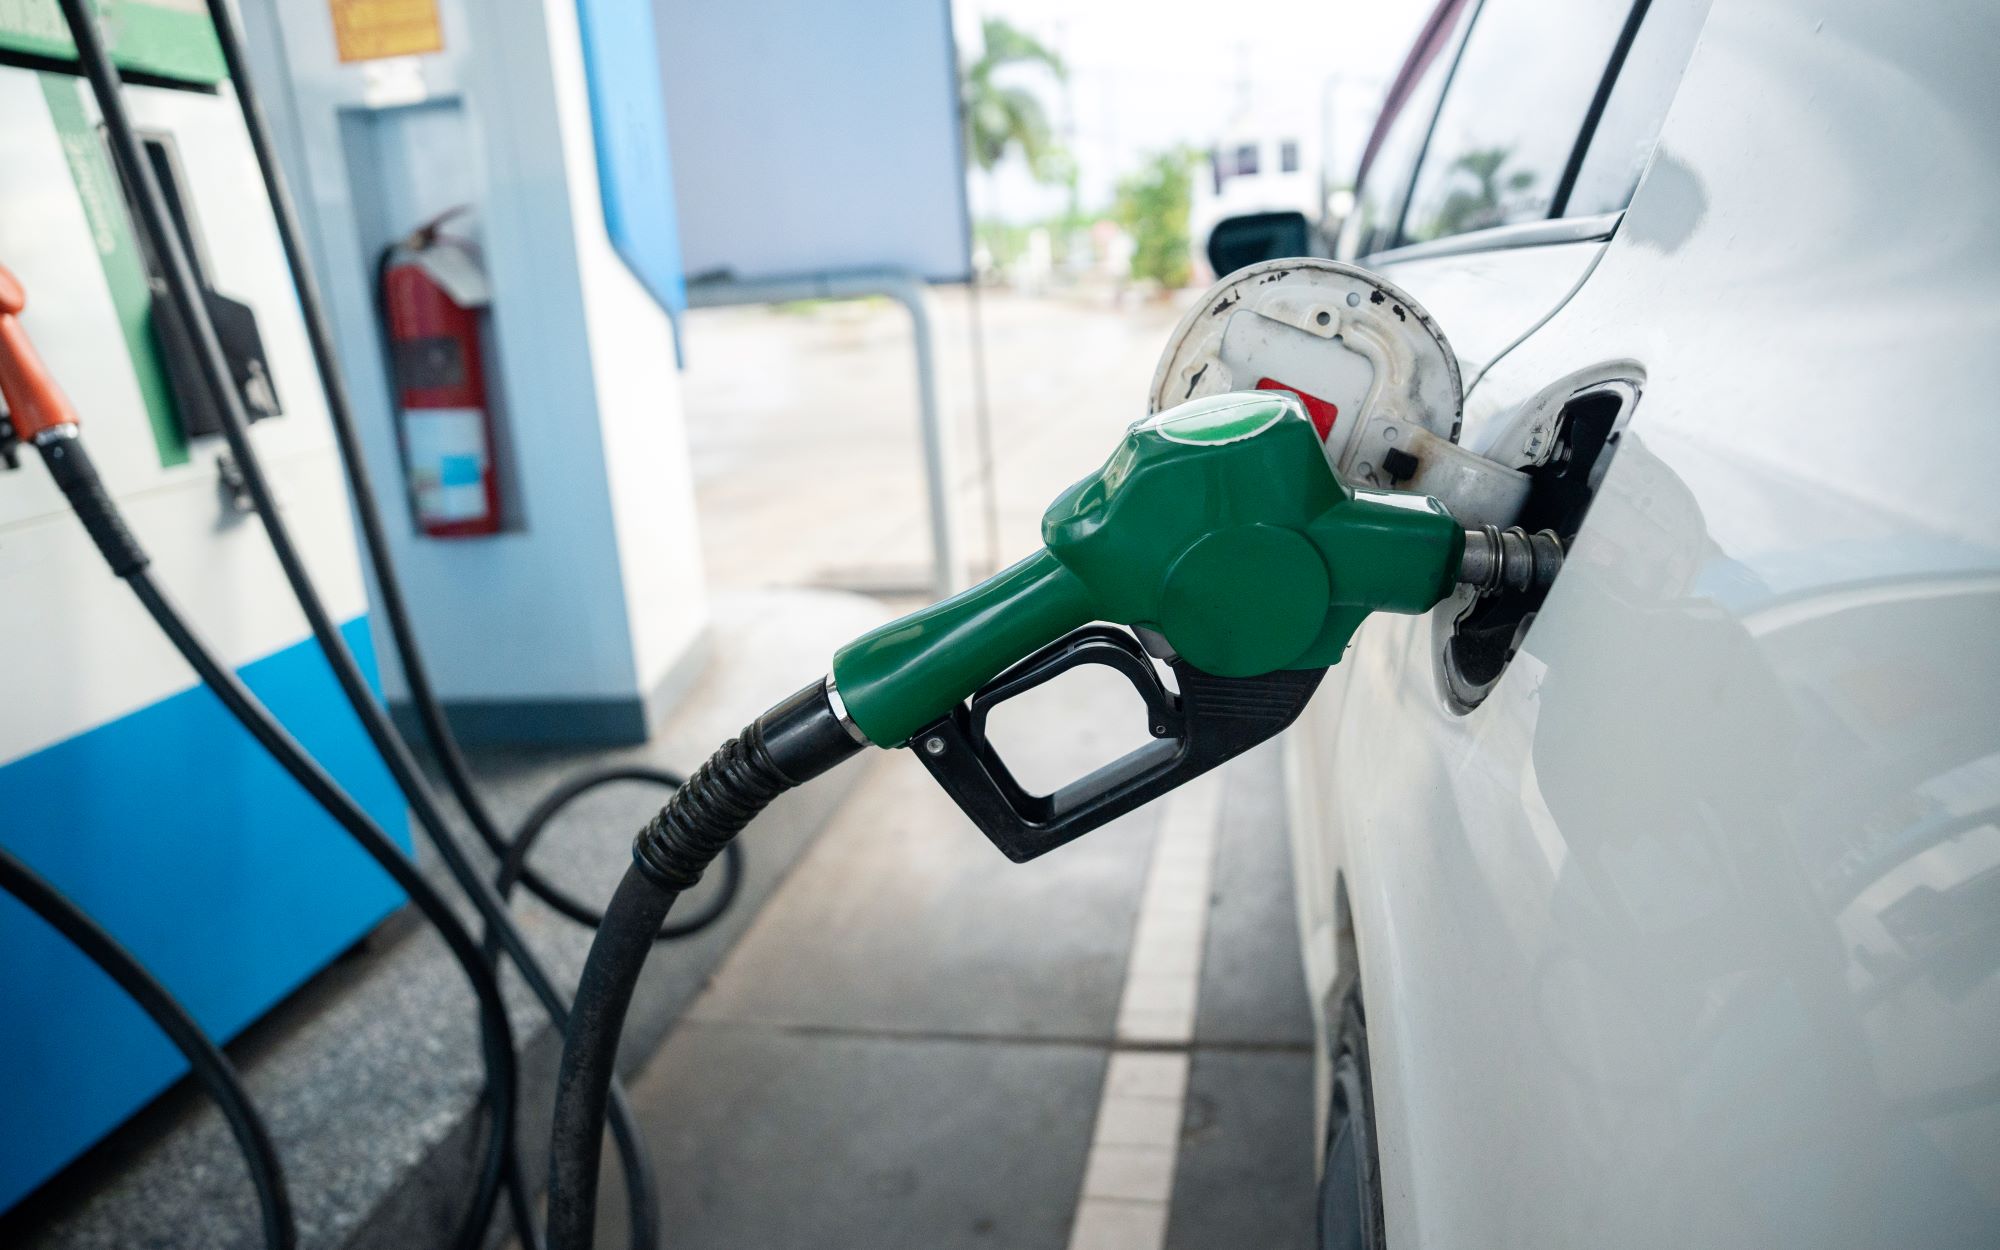 New Jersey Is Now the Only State Where You Can’t Pump Your Own Gas